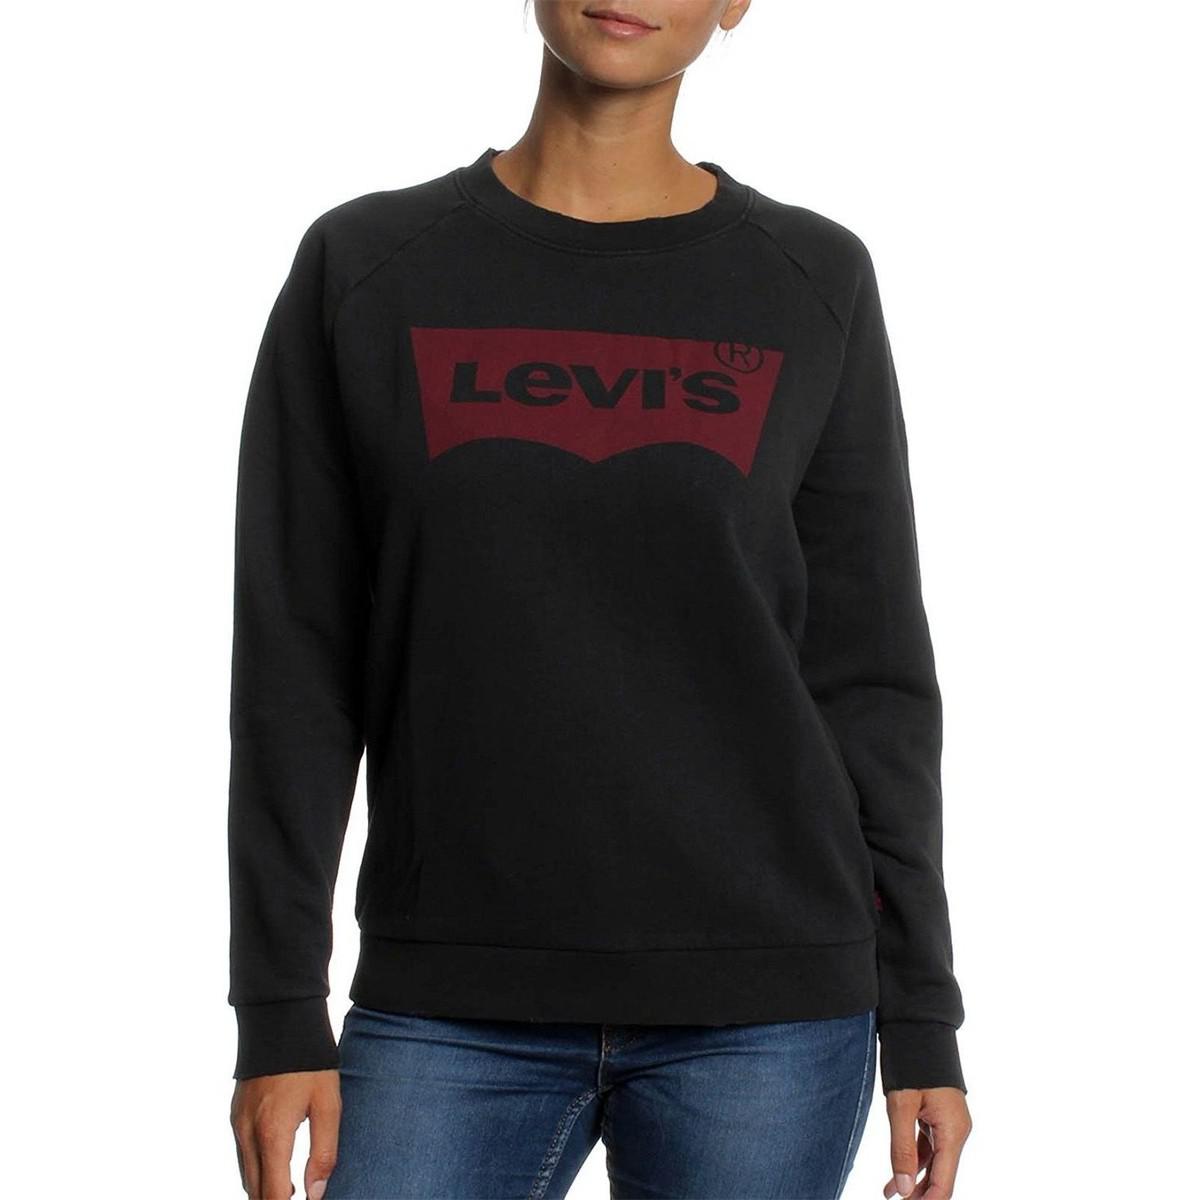 house of fraser levis womens